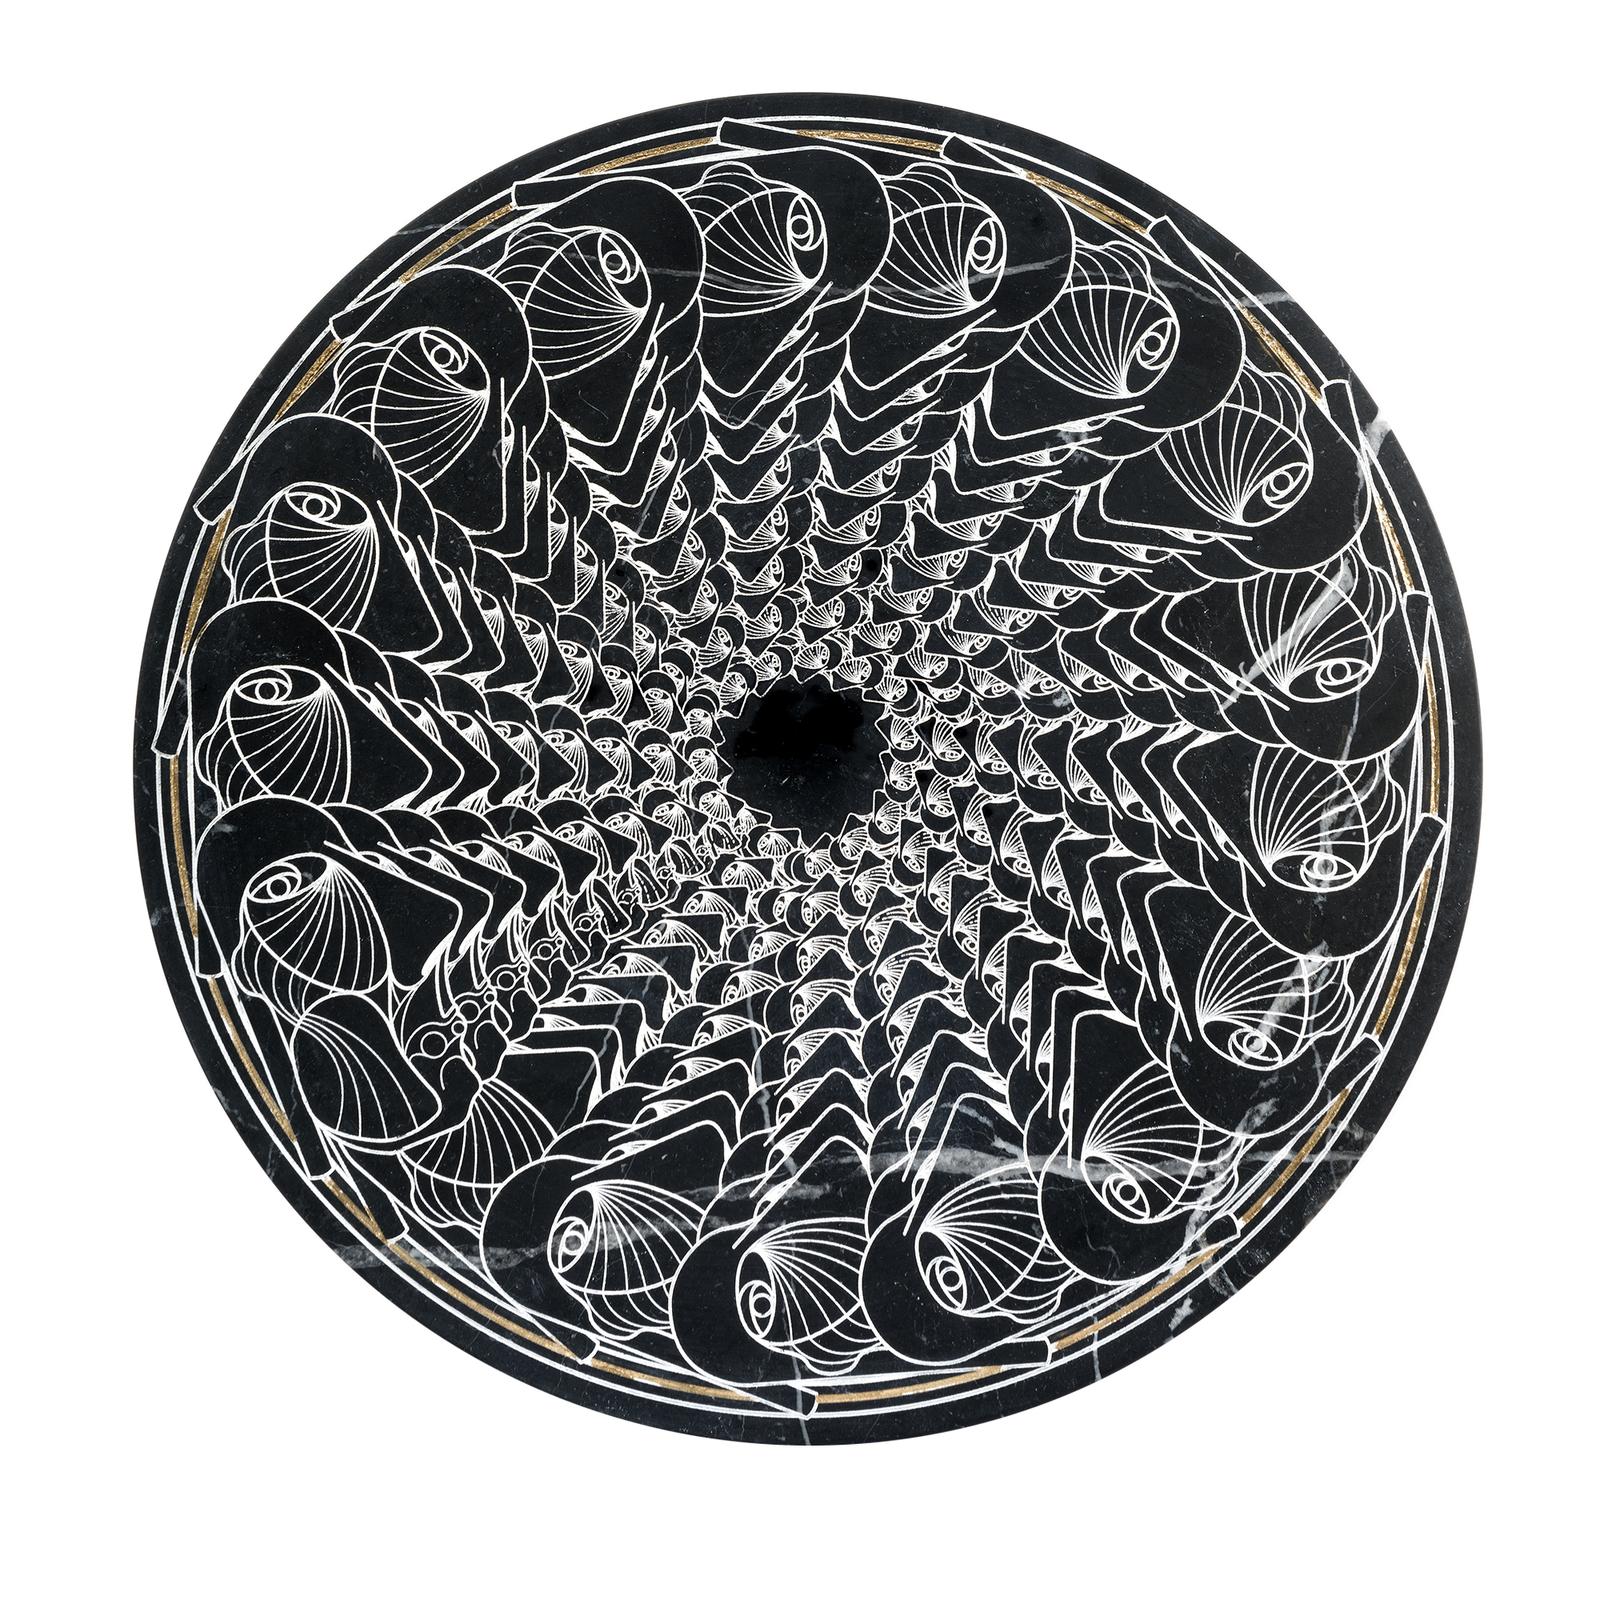 A series of serving or hanging plates – round or oval – where Federico Pepe’s signature graphics are engraved on the marble and hand-painted. Limited edition of 10.